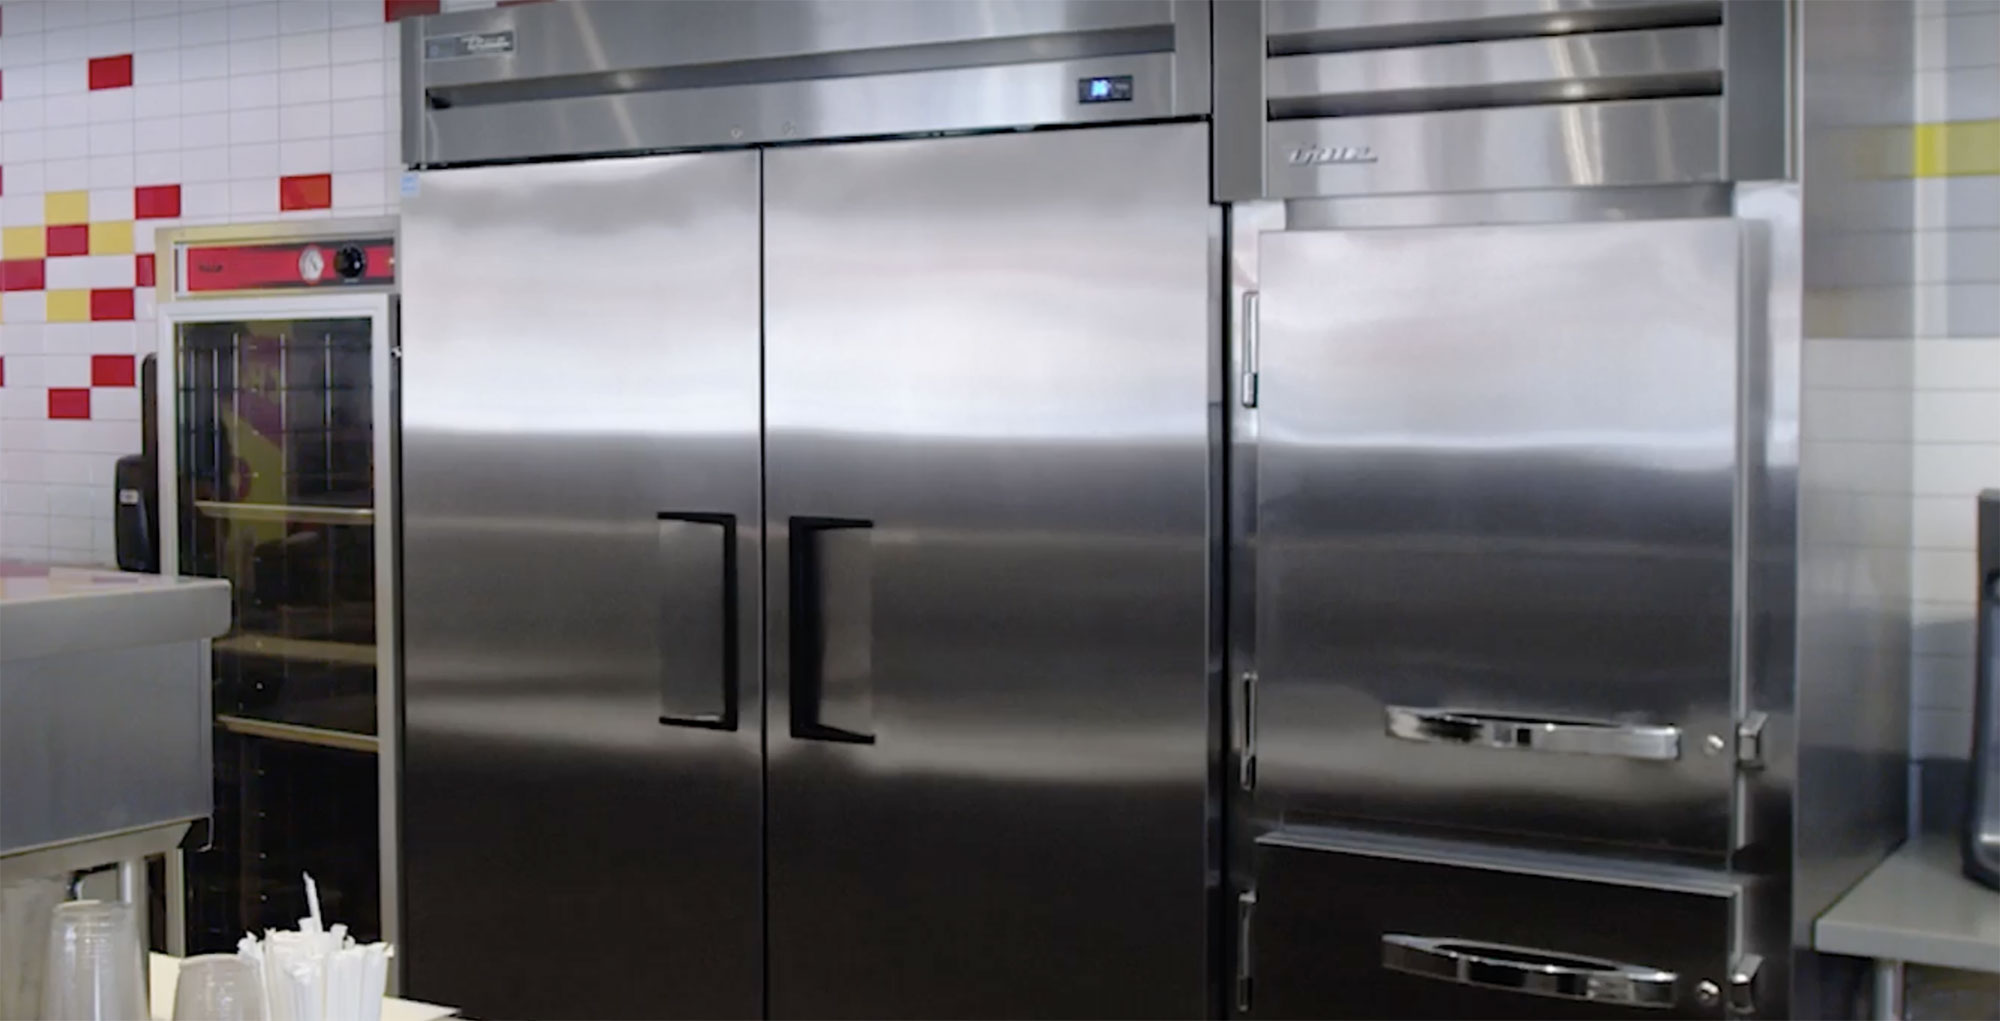 Main Differences Between Home and Commercial Refrigerators - Blogs -  Western Equipments